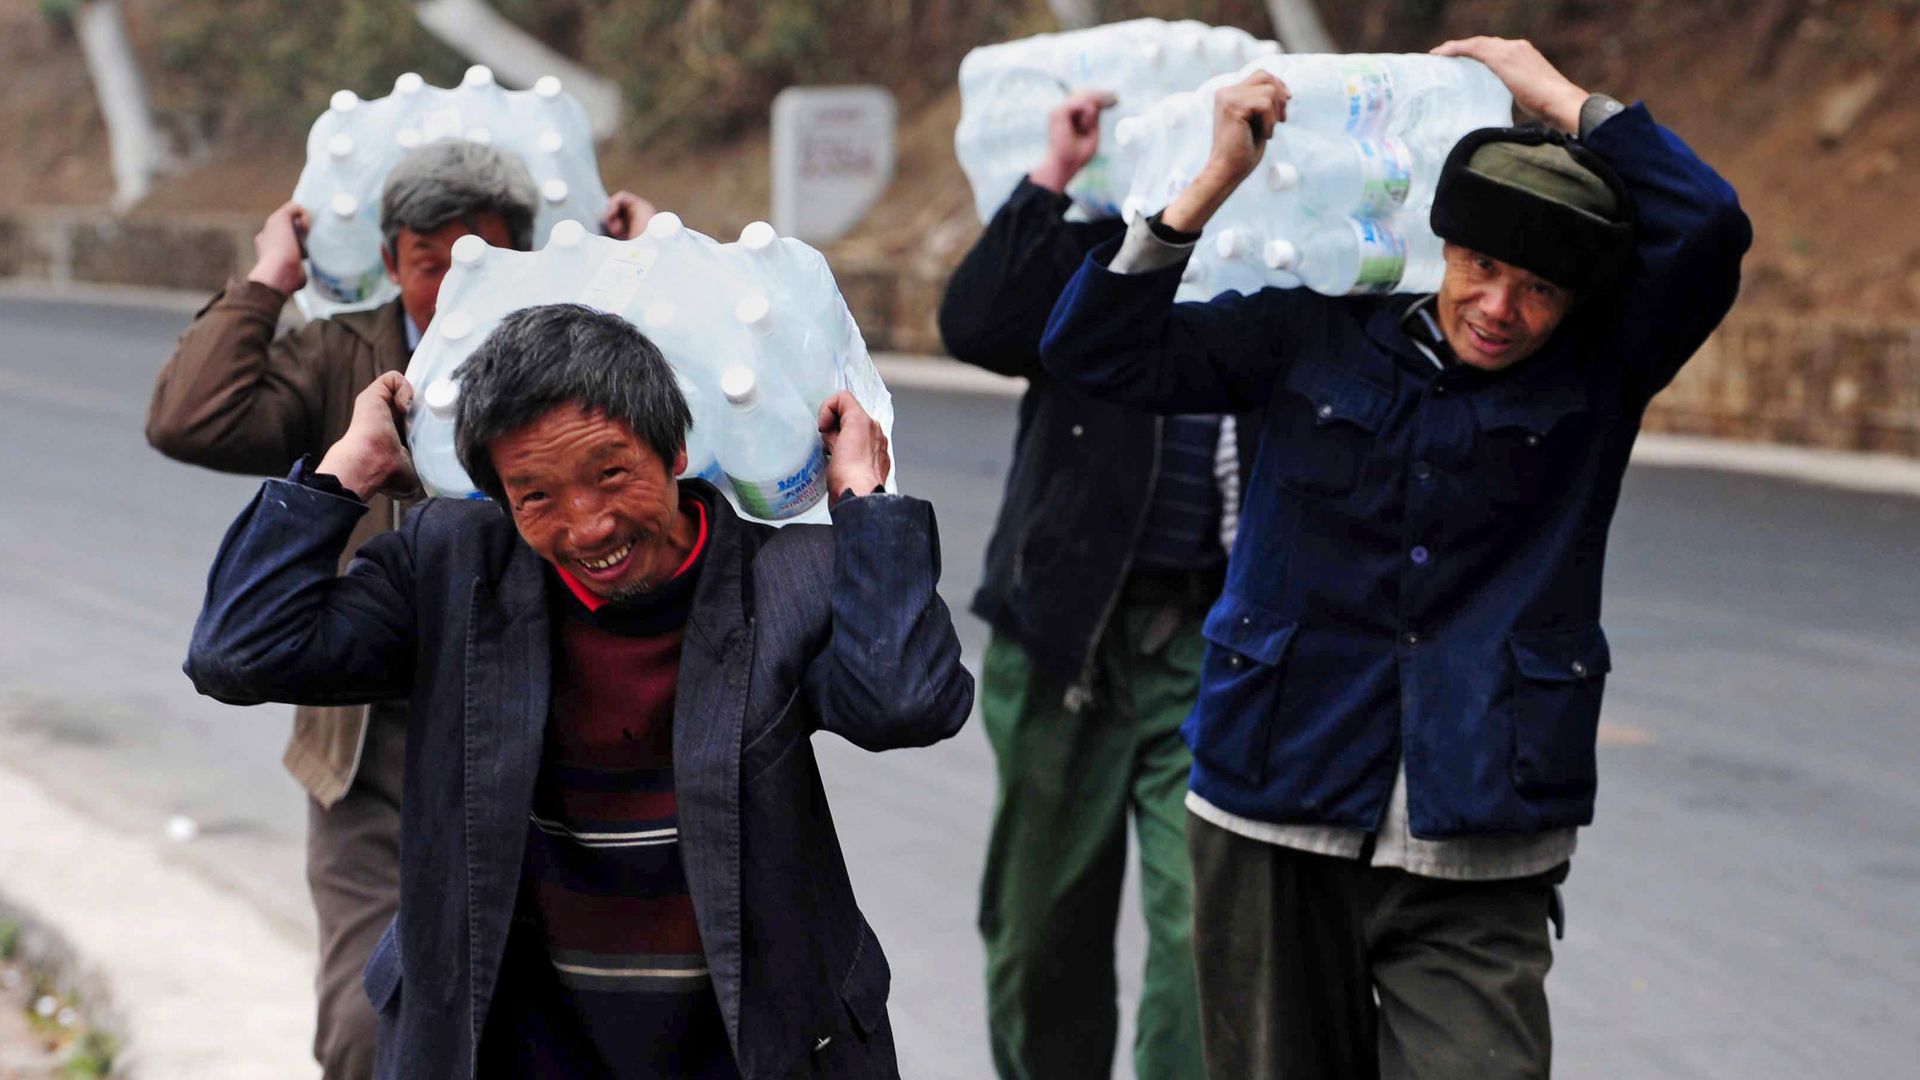 Chinese villagers carrying large gallons of water on their shoulders due to drought